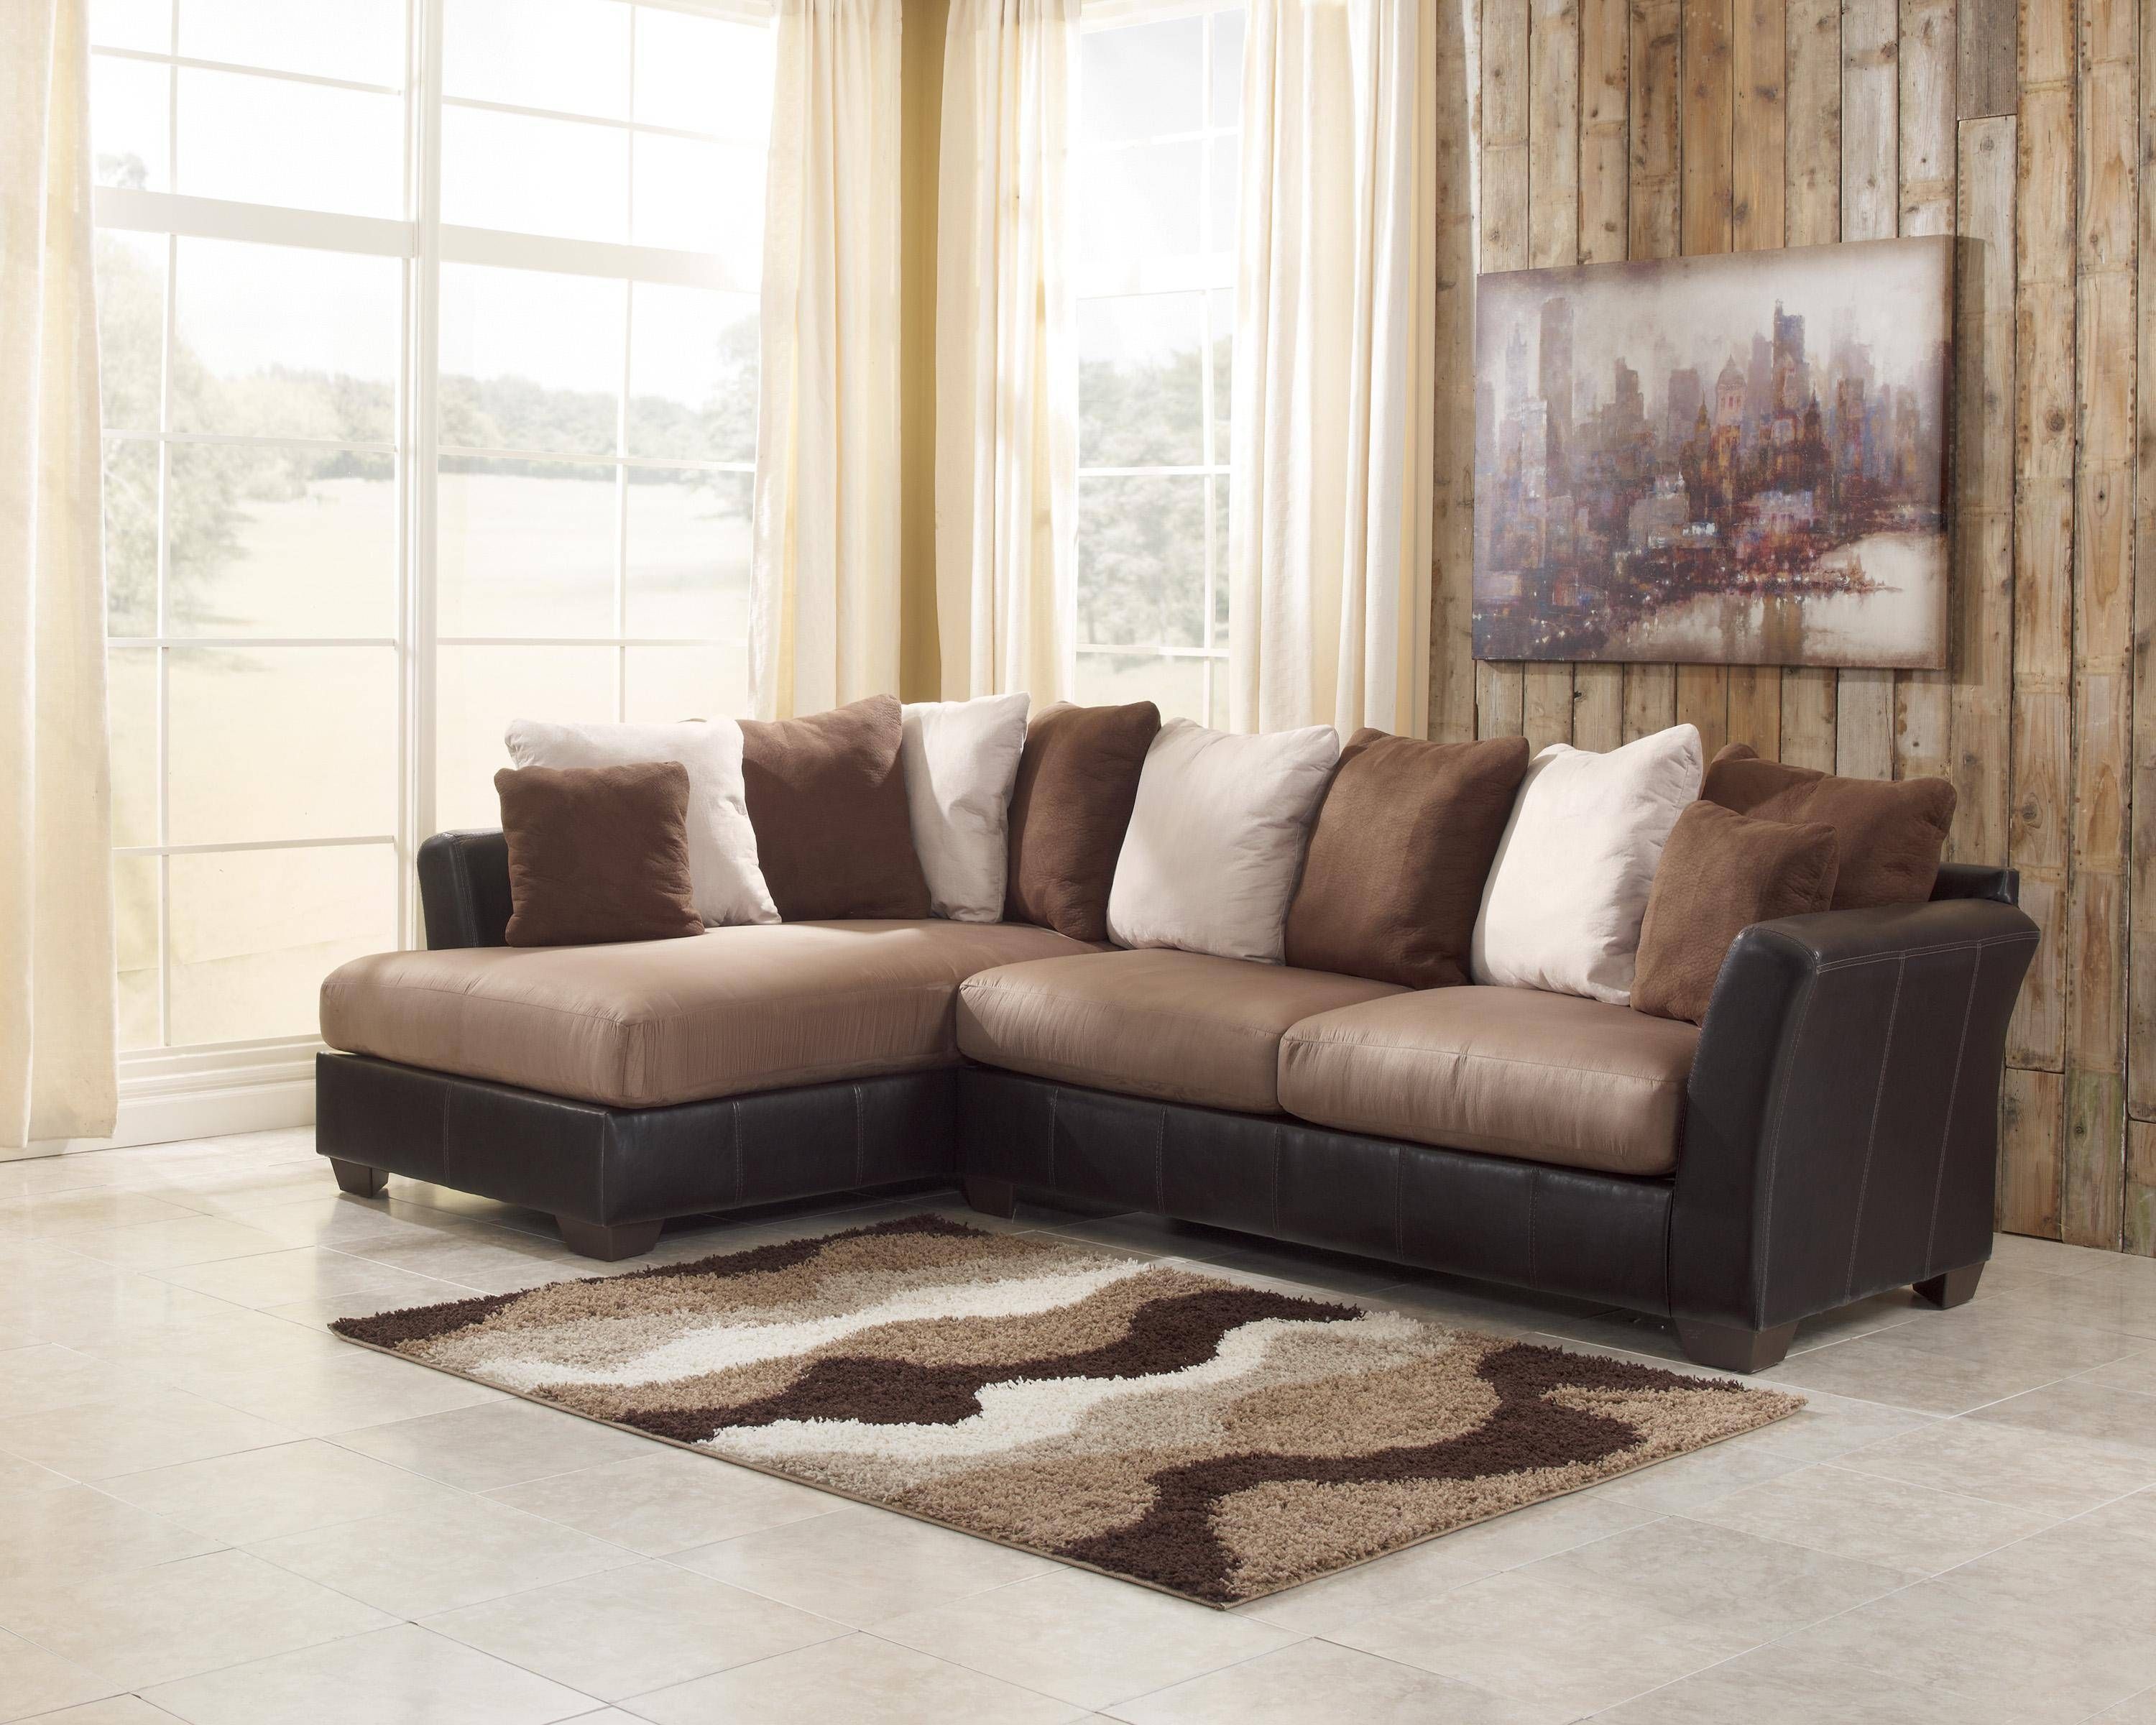 individual piece sectional leather sofa